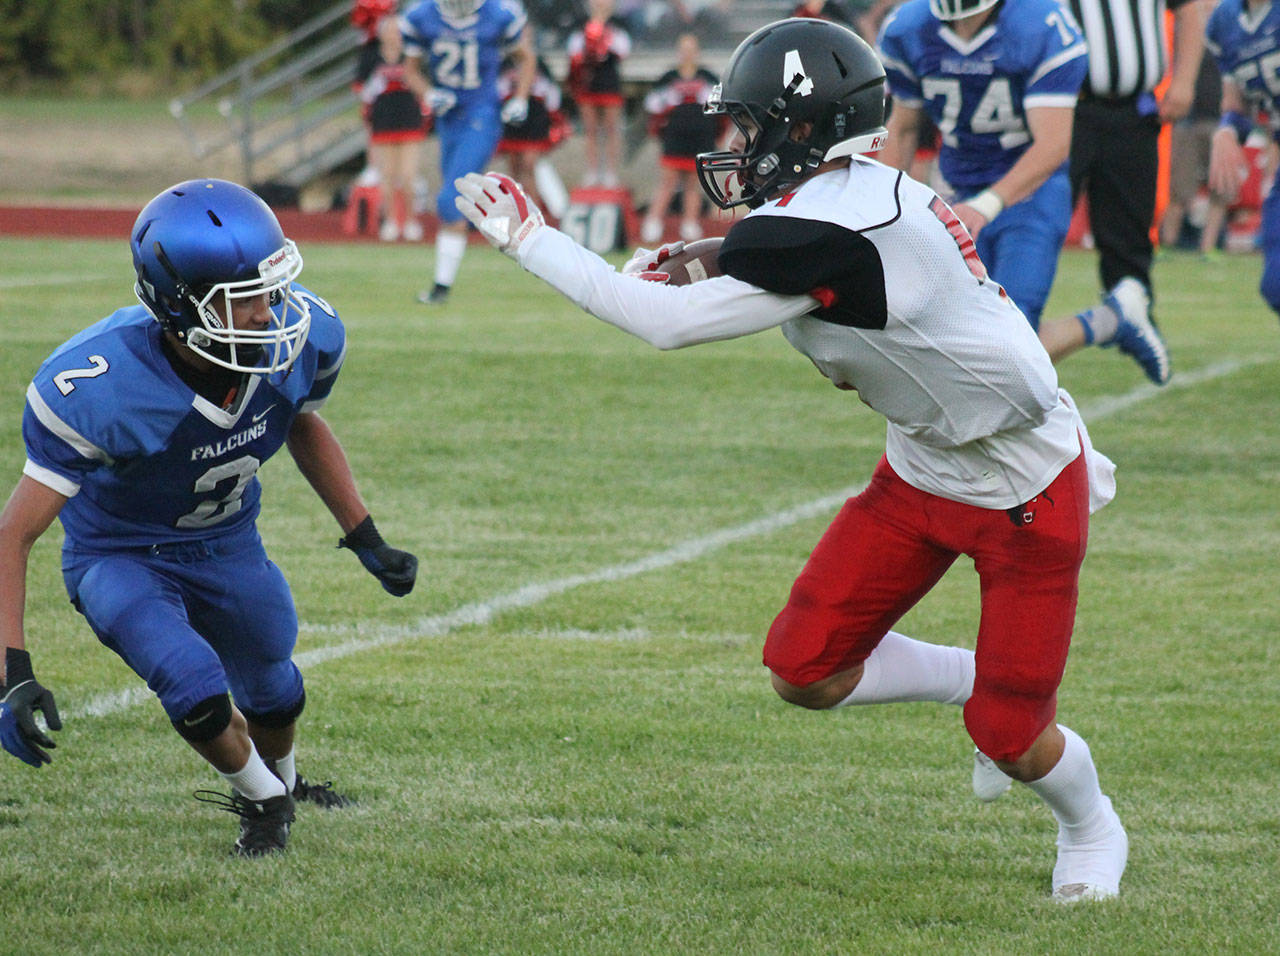 Coupeville’s Hunter Smith tries to get by Alex Black (2). (Photo by Evan Thompson/Whidbey News Group)